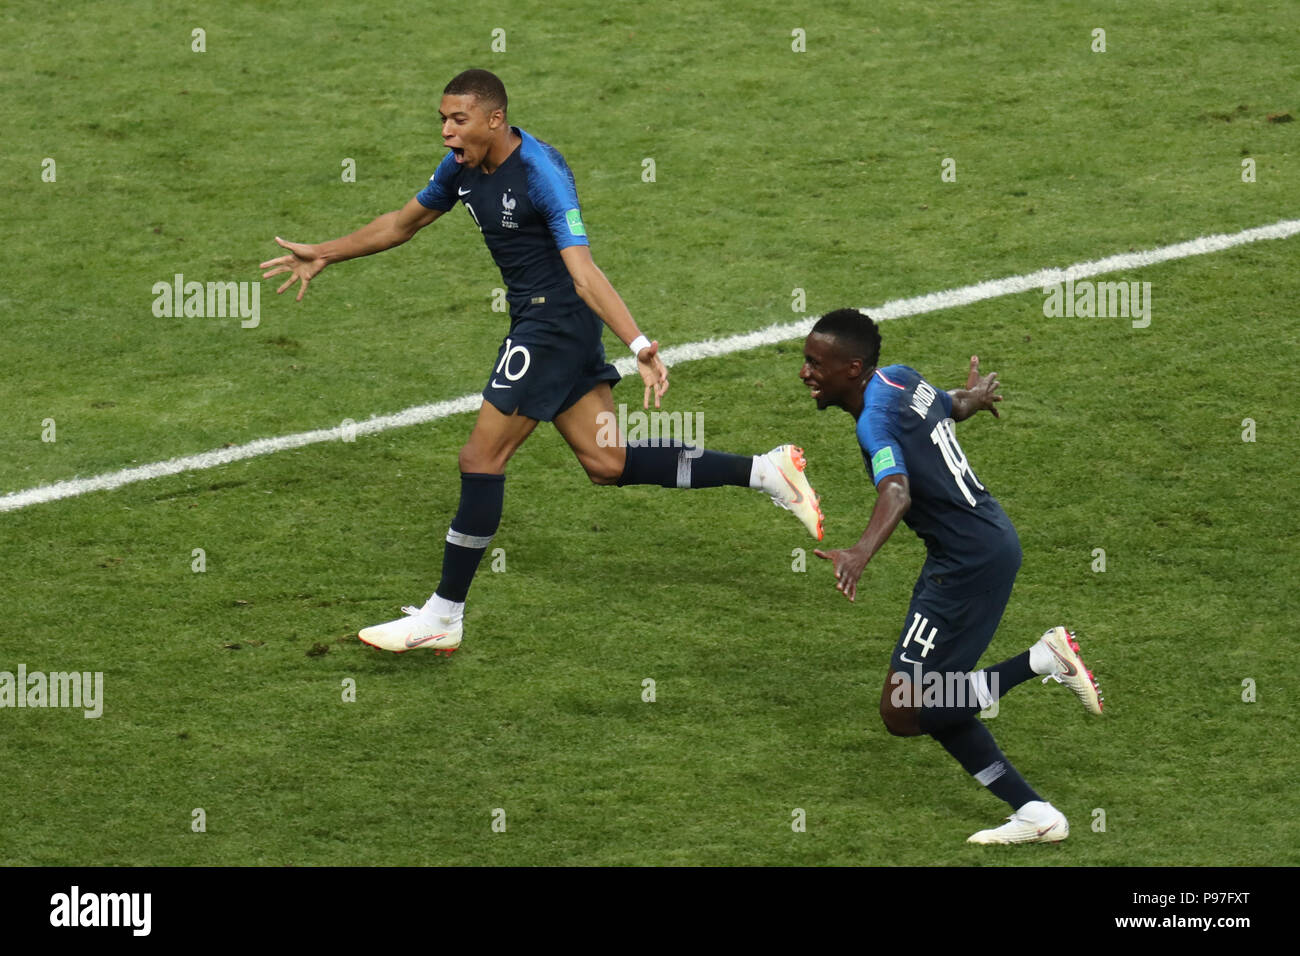 Kylian Mbappe & Blaise Matuidi FRANCE V CROATIA FRANCE V CROATIA, 2018 FIFA WORLD CUP FINAL 15 July 2018 GBC9701 2018 FIFA World Cup Russia, Final STRICTLY EDITORIAL USE ONLY. If The Player/Players Depicted In This Image Is/Are Playing For An English Club Or The England National Team. Then This Image May Only Be Used For Editorial Purposes. No Commercial Use. The Following Usages Are Also Restricted EVEN IF IN AN EDITORIAL CONTEXT: Use in conjuction with, or part of, any unauthorized audio, video, data, fixture lists, club/league logos, Betting, Games or any 'live' services. Stock Photo